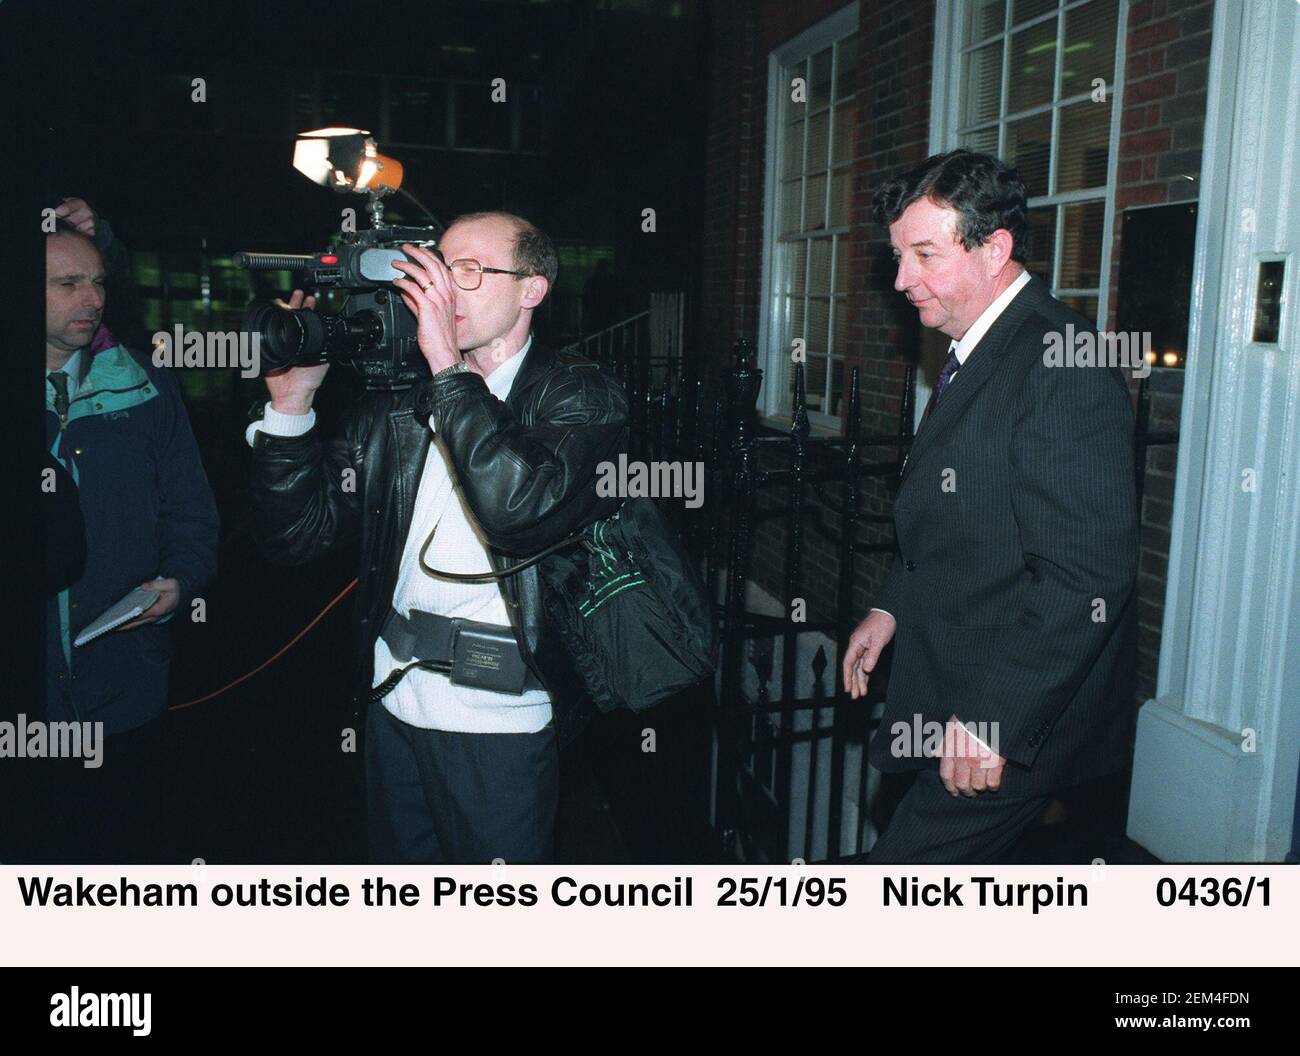 John Wakeham former cabinet minister outside the Press Council after it  emerged that he had joined